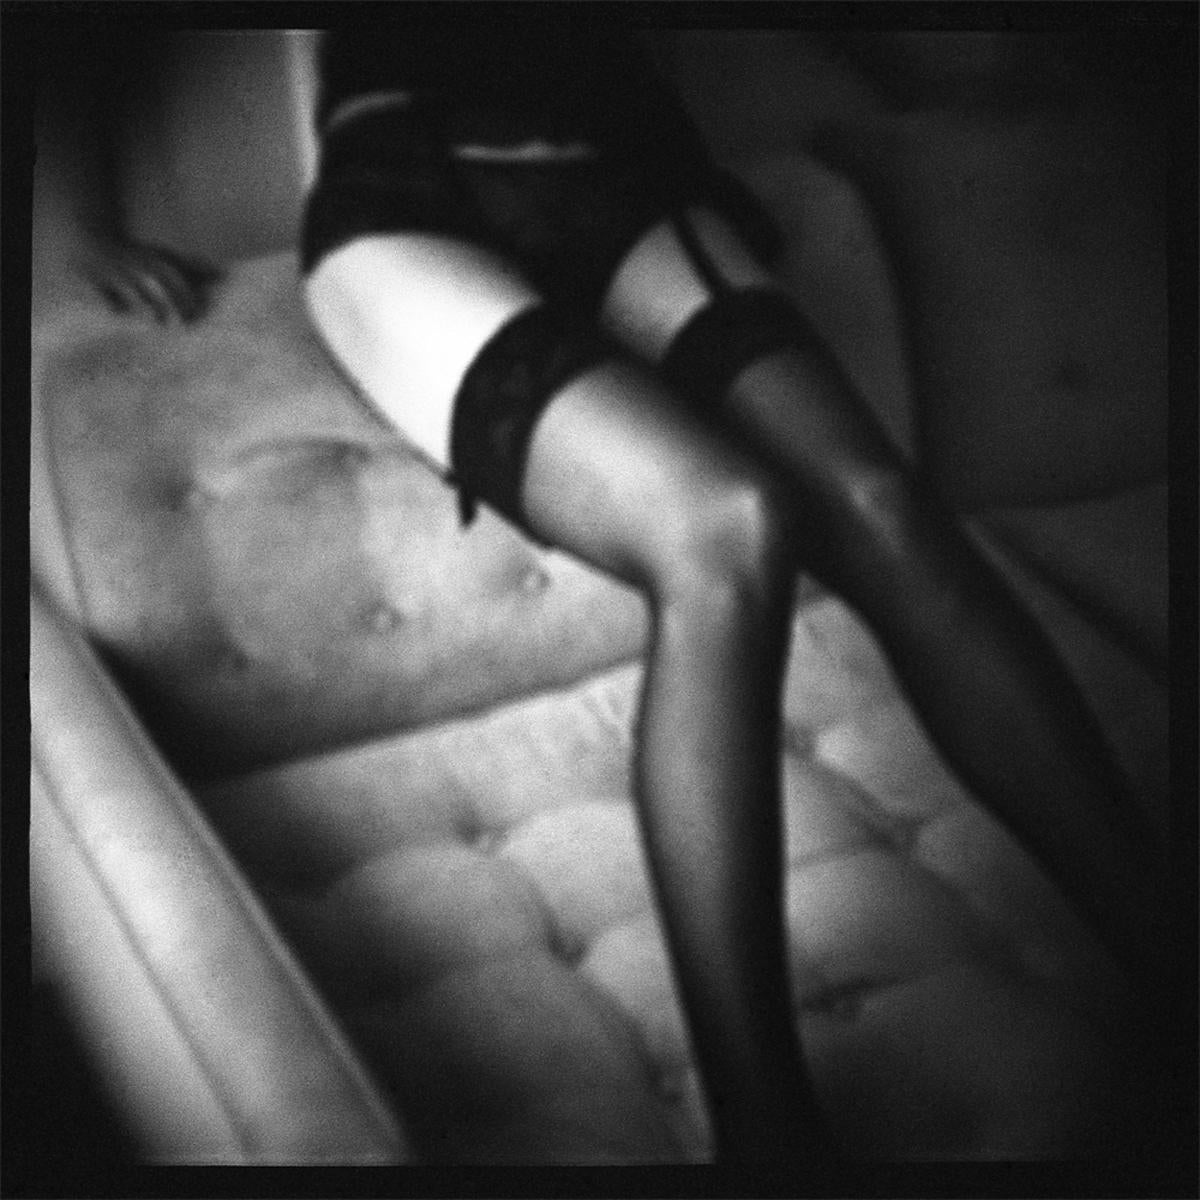 Daniel Grant Black and White Photograph - the couch, Photograph, Archival Ink Jet